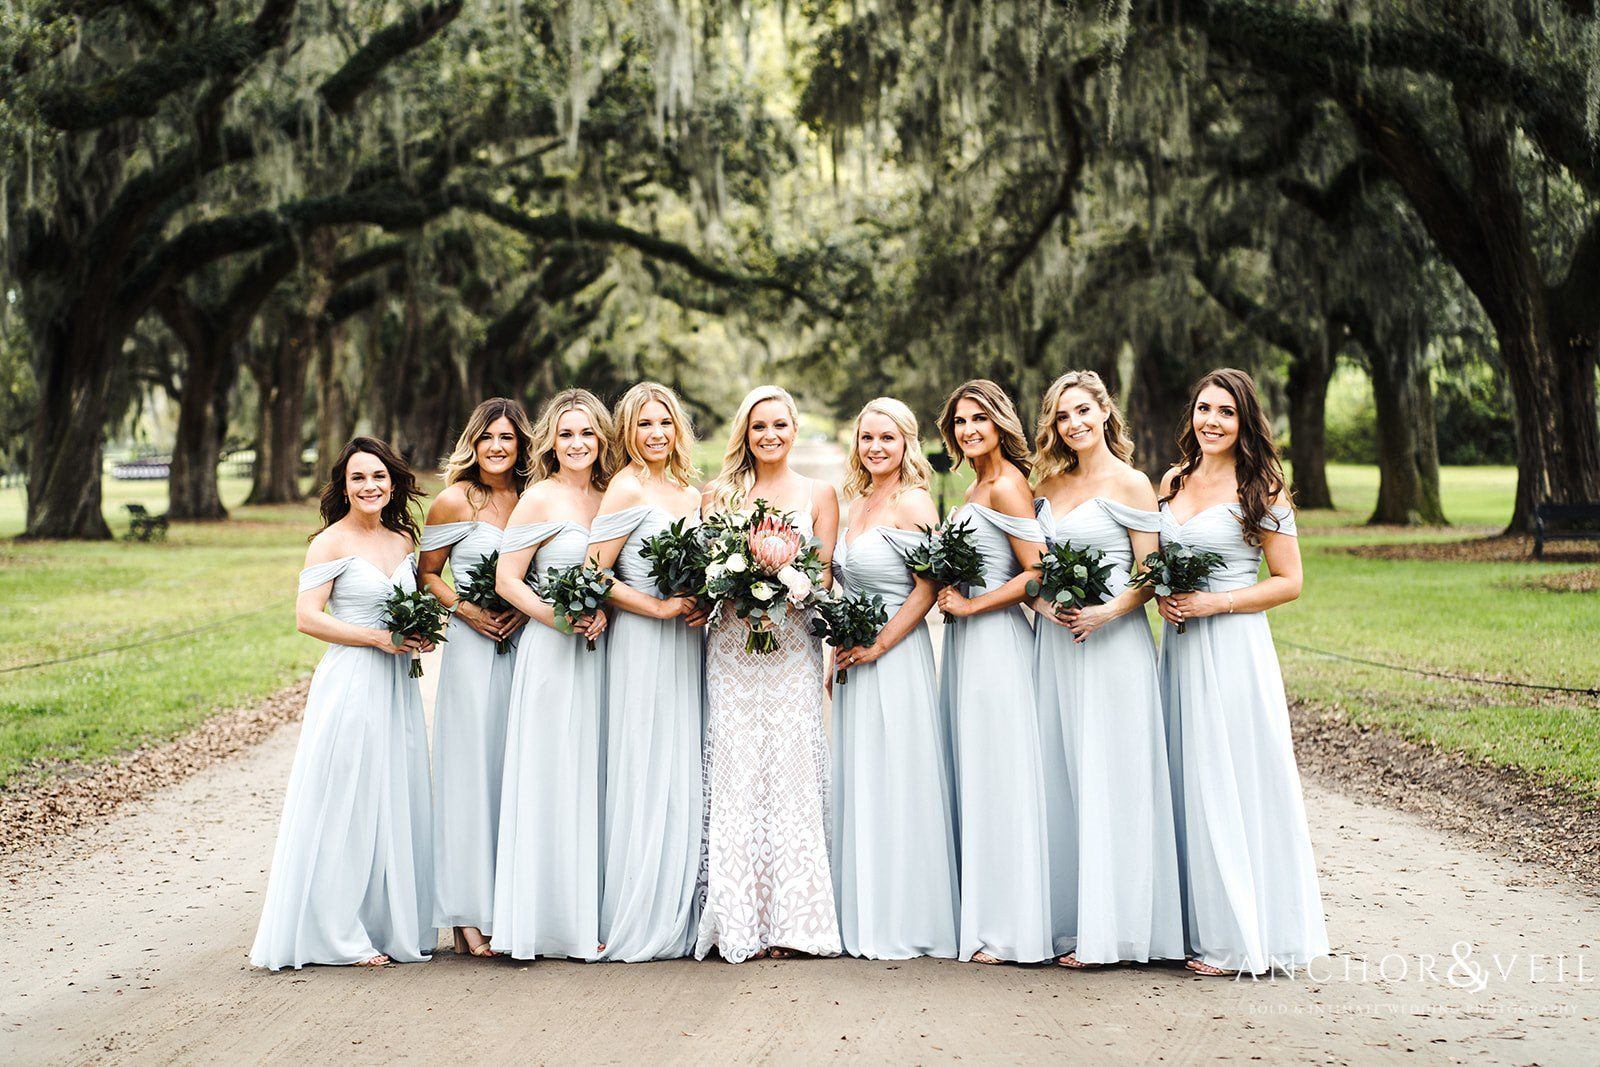 The bride and her bridesmaids at the Boone Hall Plantation Wedding 